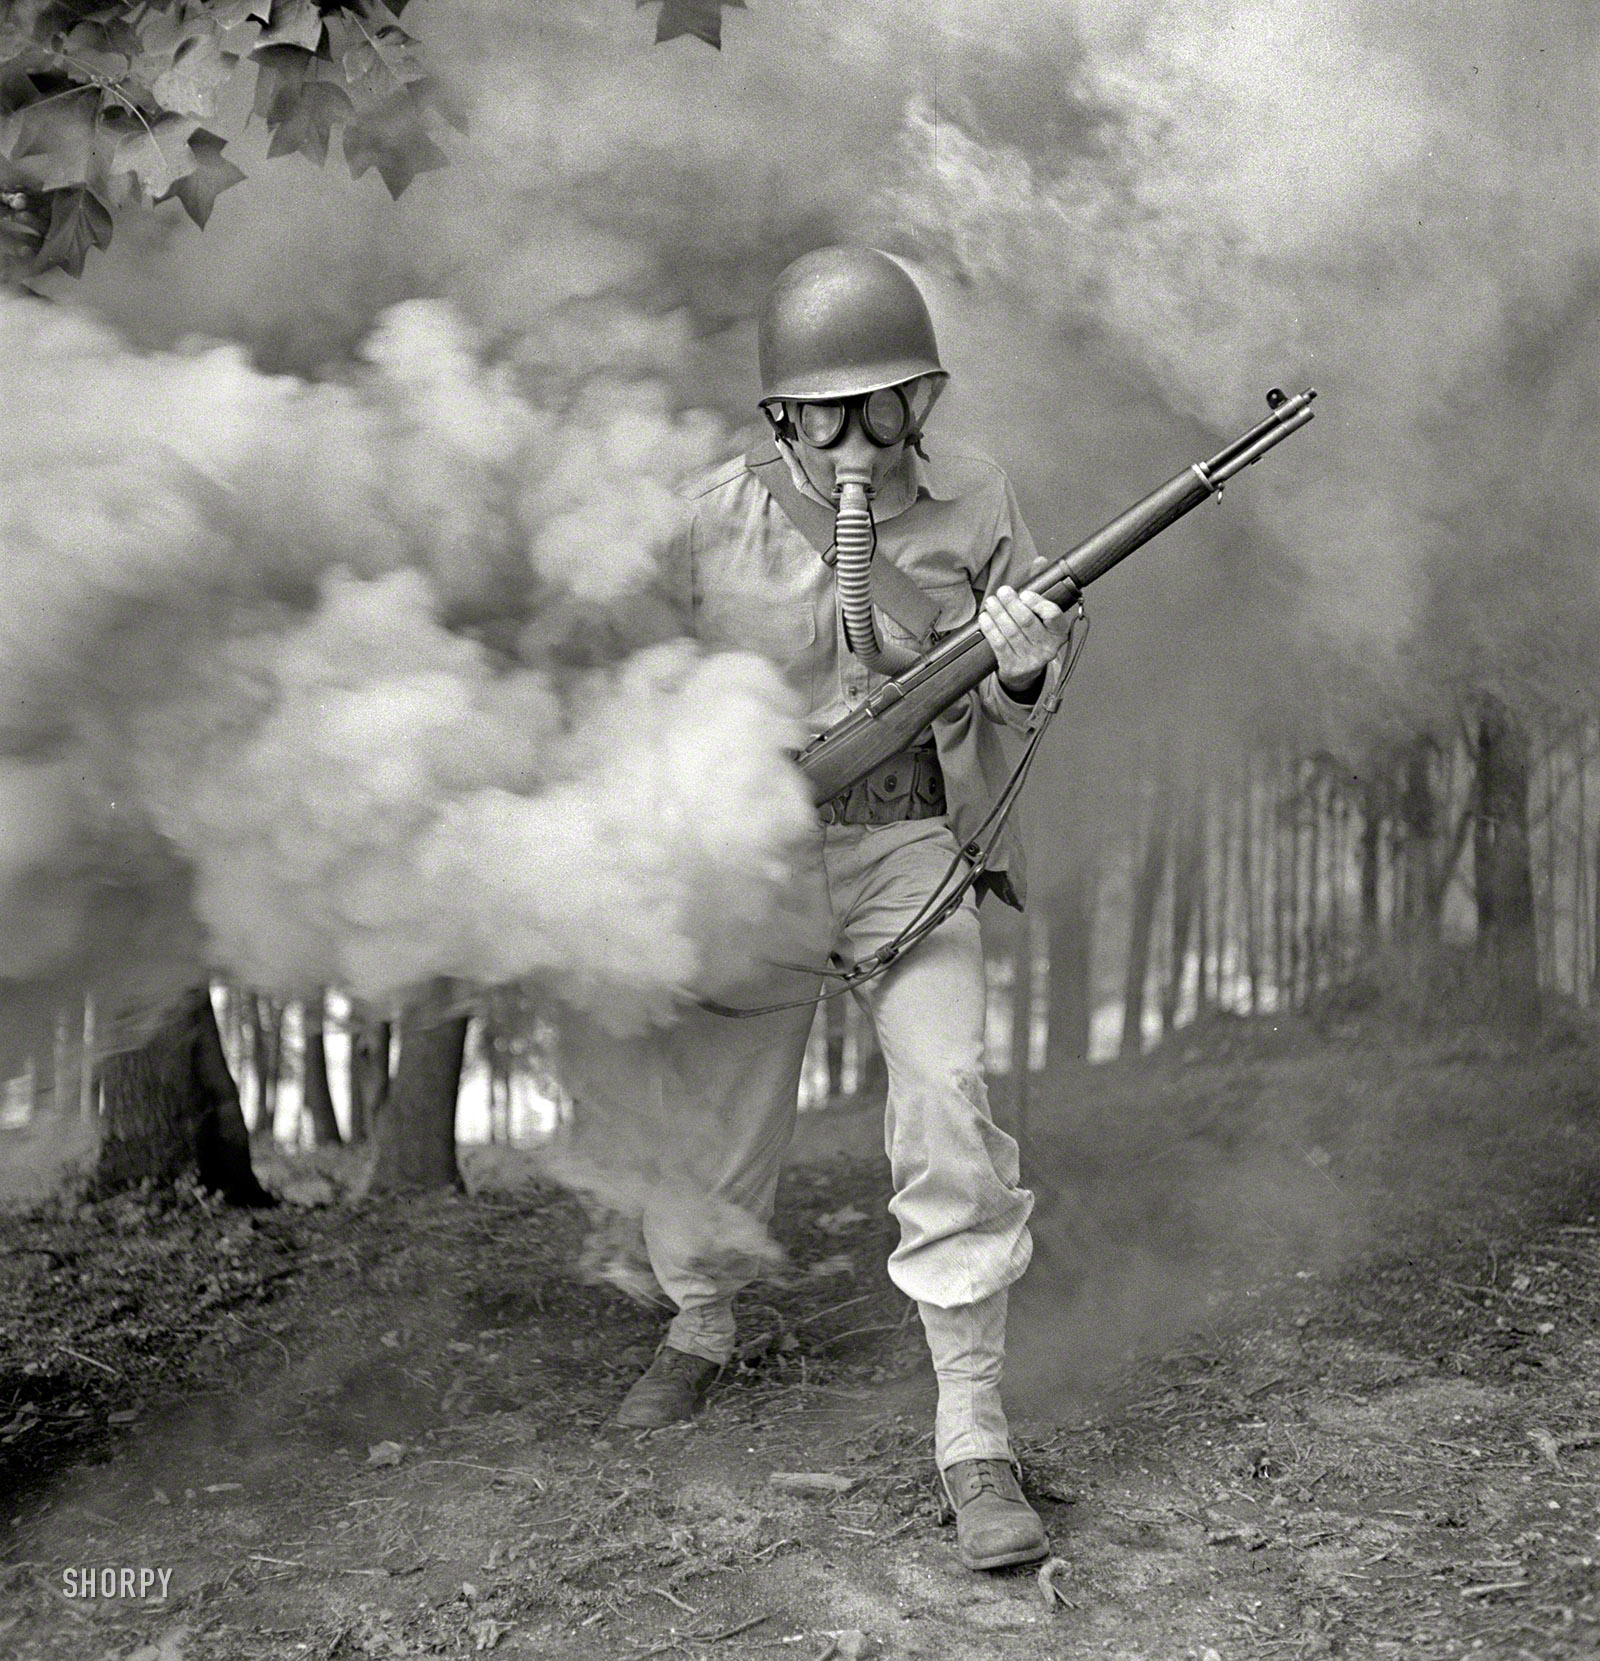 September 1942. "Fort Belvoir, Virginia. Sergeant George Camplair learning how to use a gas mask in a practice smokescreen." Sgt. Camplair in one of his scarier manifestations. (He could have used the mask back when he was peeling onions.) Photo by Jack Delano, Office of War Information. View full size.